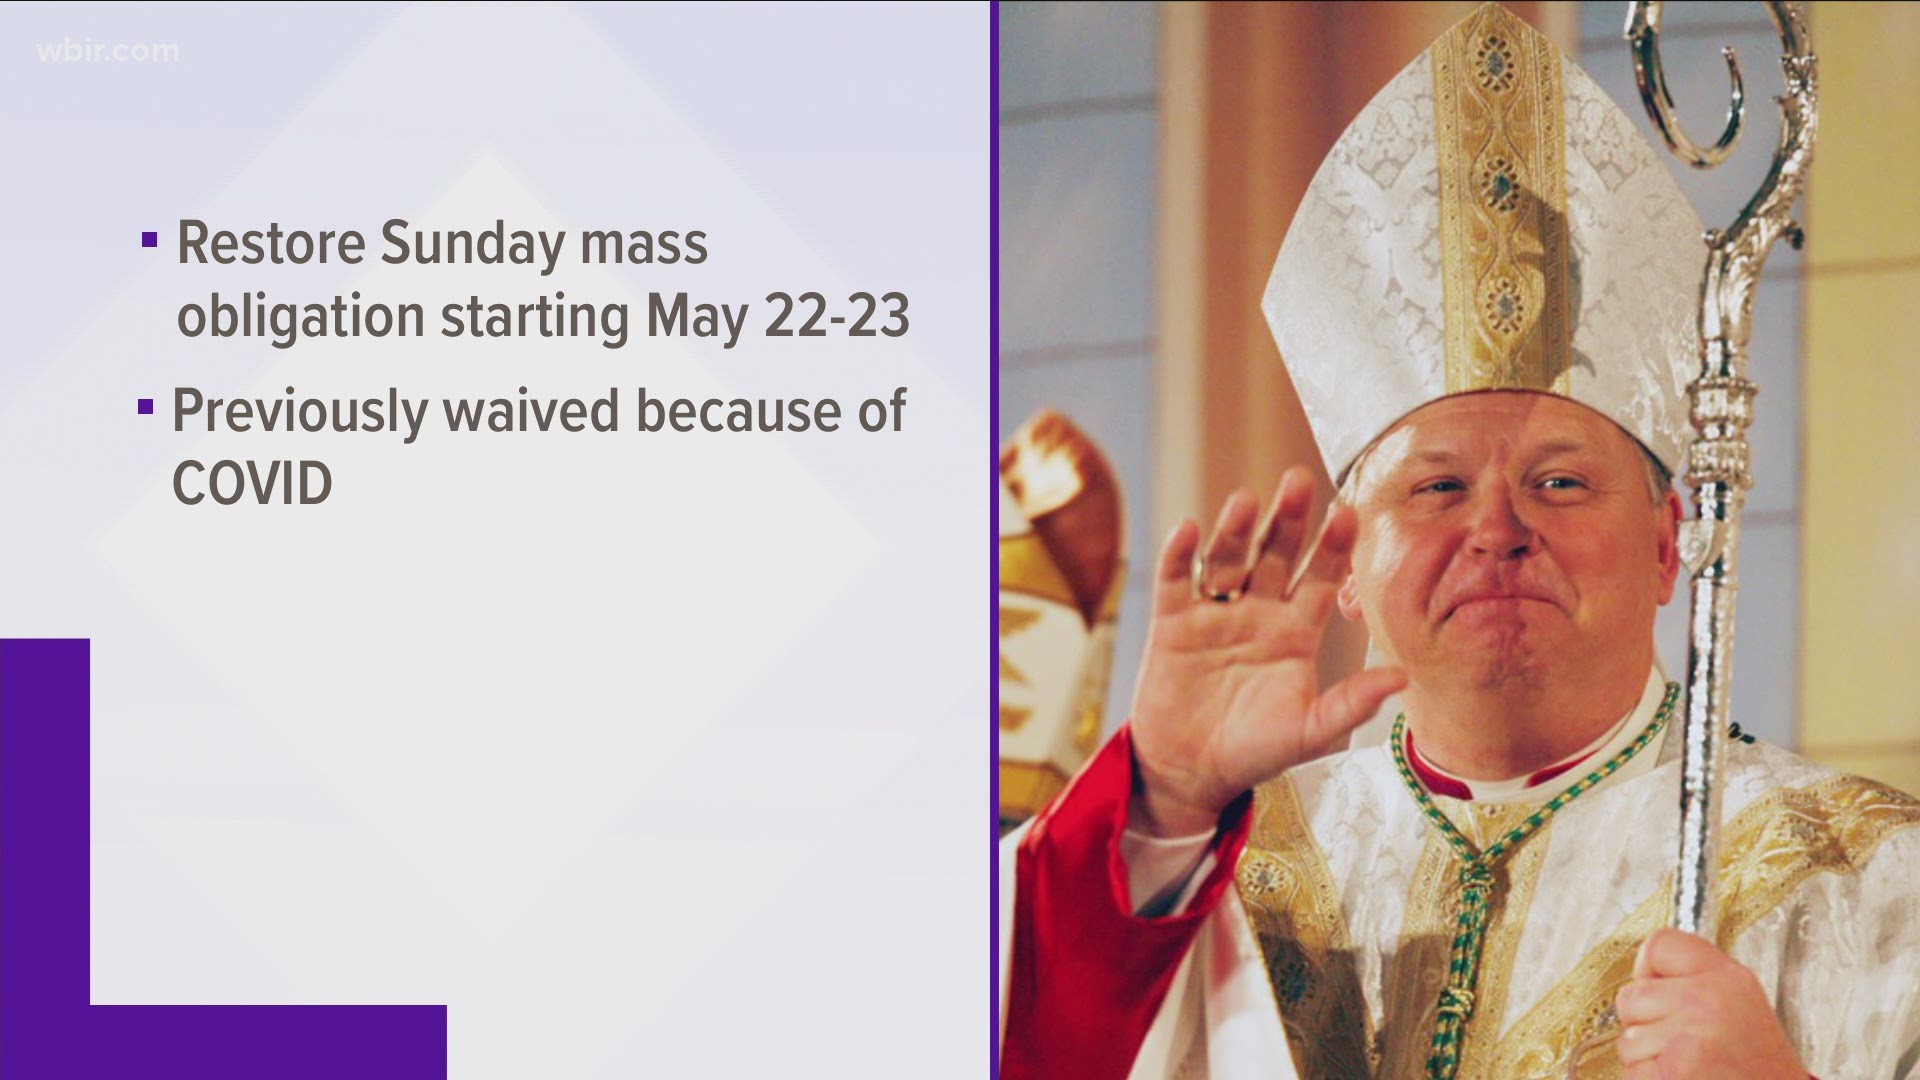 The Bishop said he wants to restore the obligation for Catholics to Sunday Mass starting the weekend of May 22.